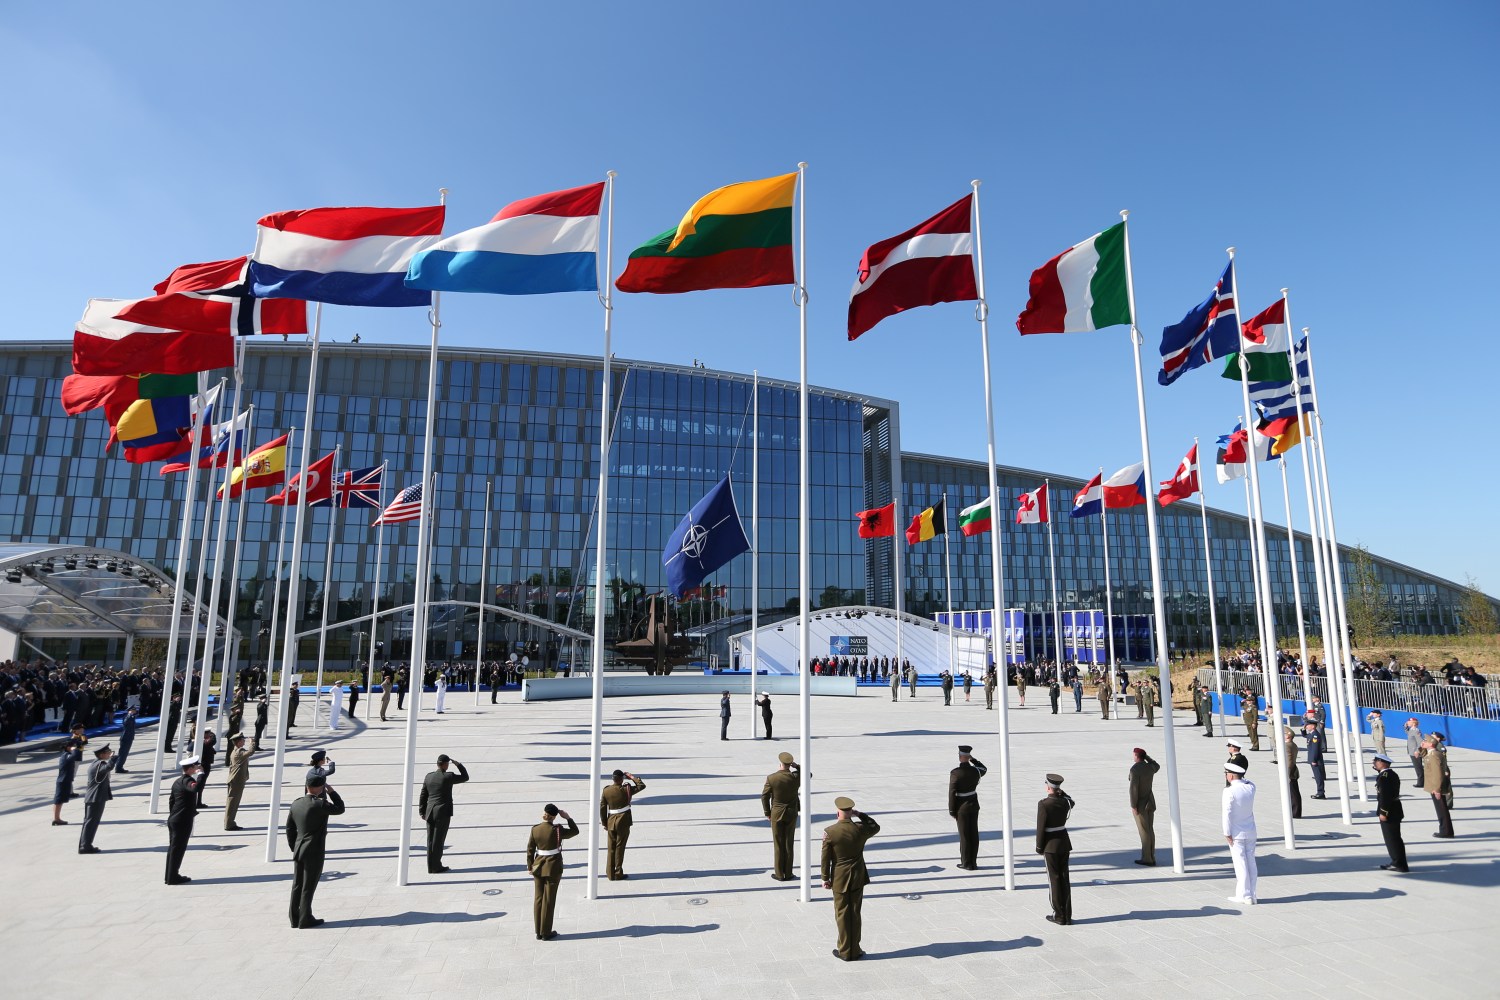 Flags of NATO member countires fly during a ceremony at the new NATO headquarters before the start of a summit in Brussels, Belgium, May 25, 2017.    REUTERS/Christian Hartmann - RC1AE63D1910